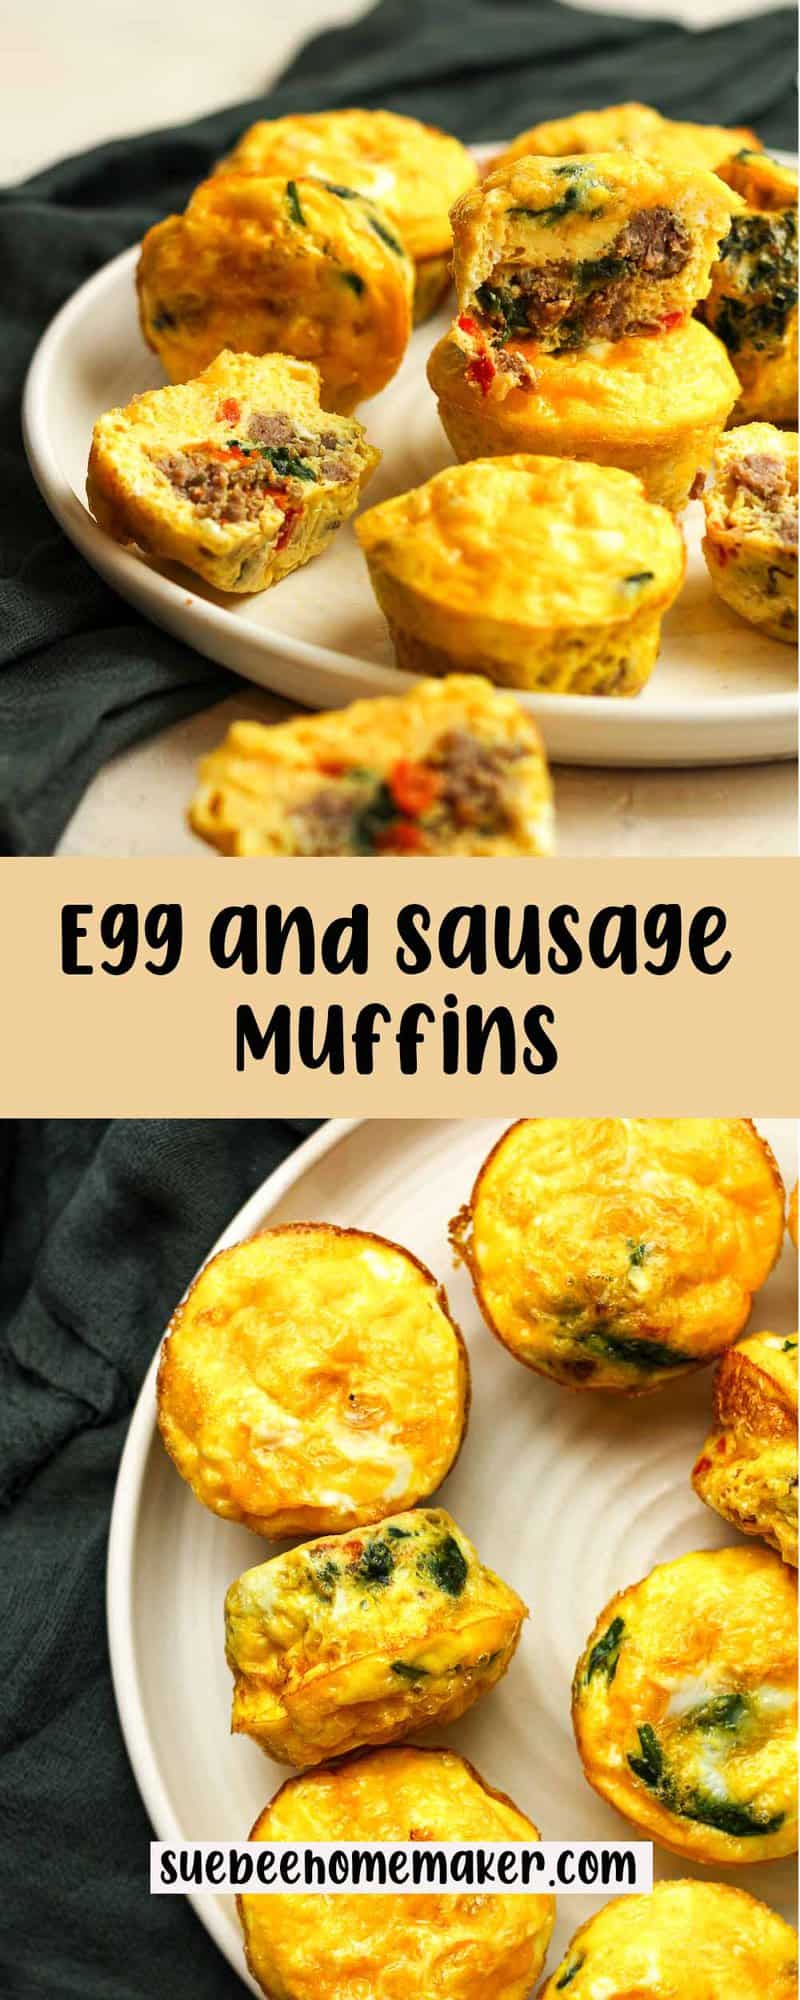 A collage of egg and sausage muffins for breakfast.